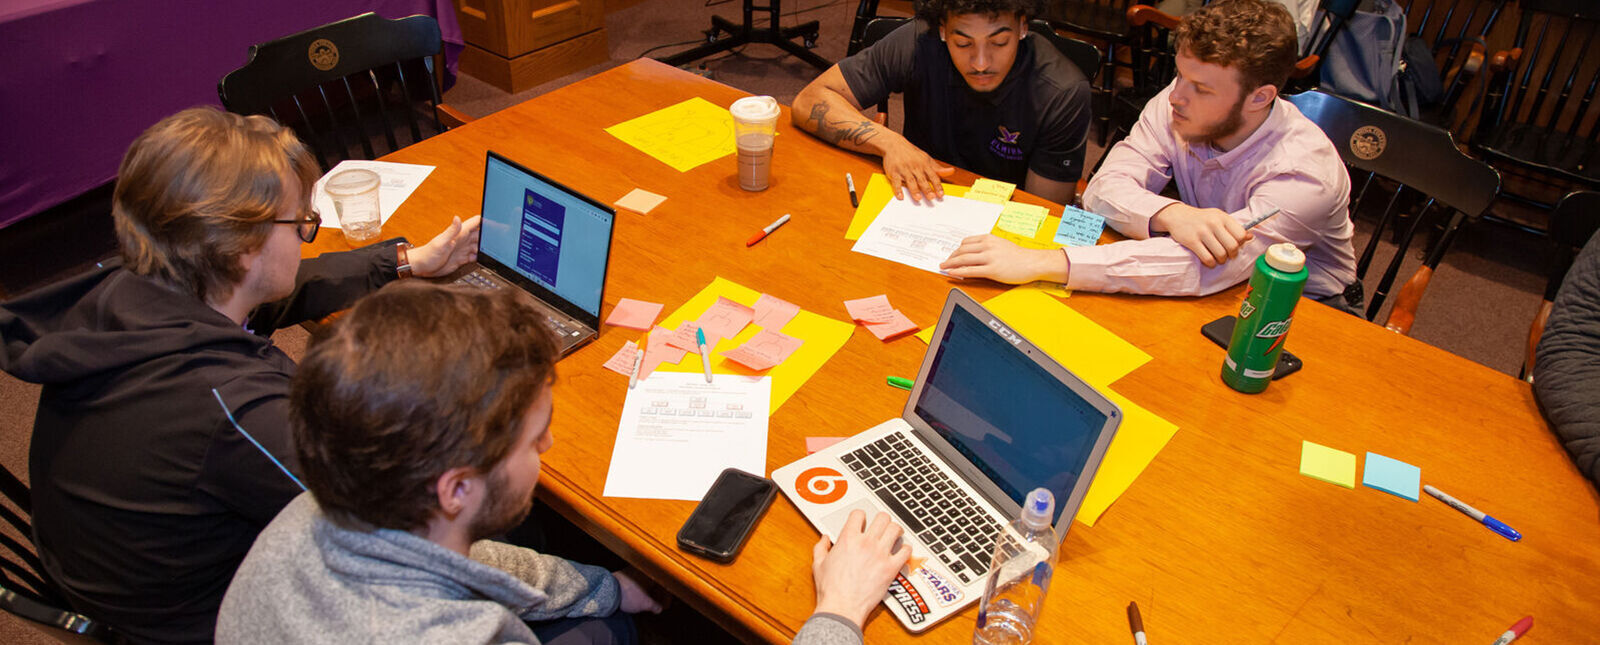 Students work together on laptops and with papers around a wooden table